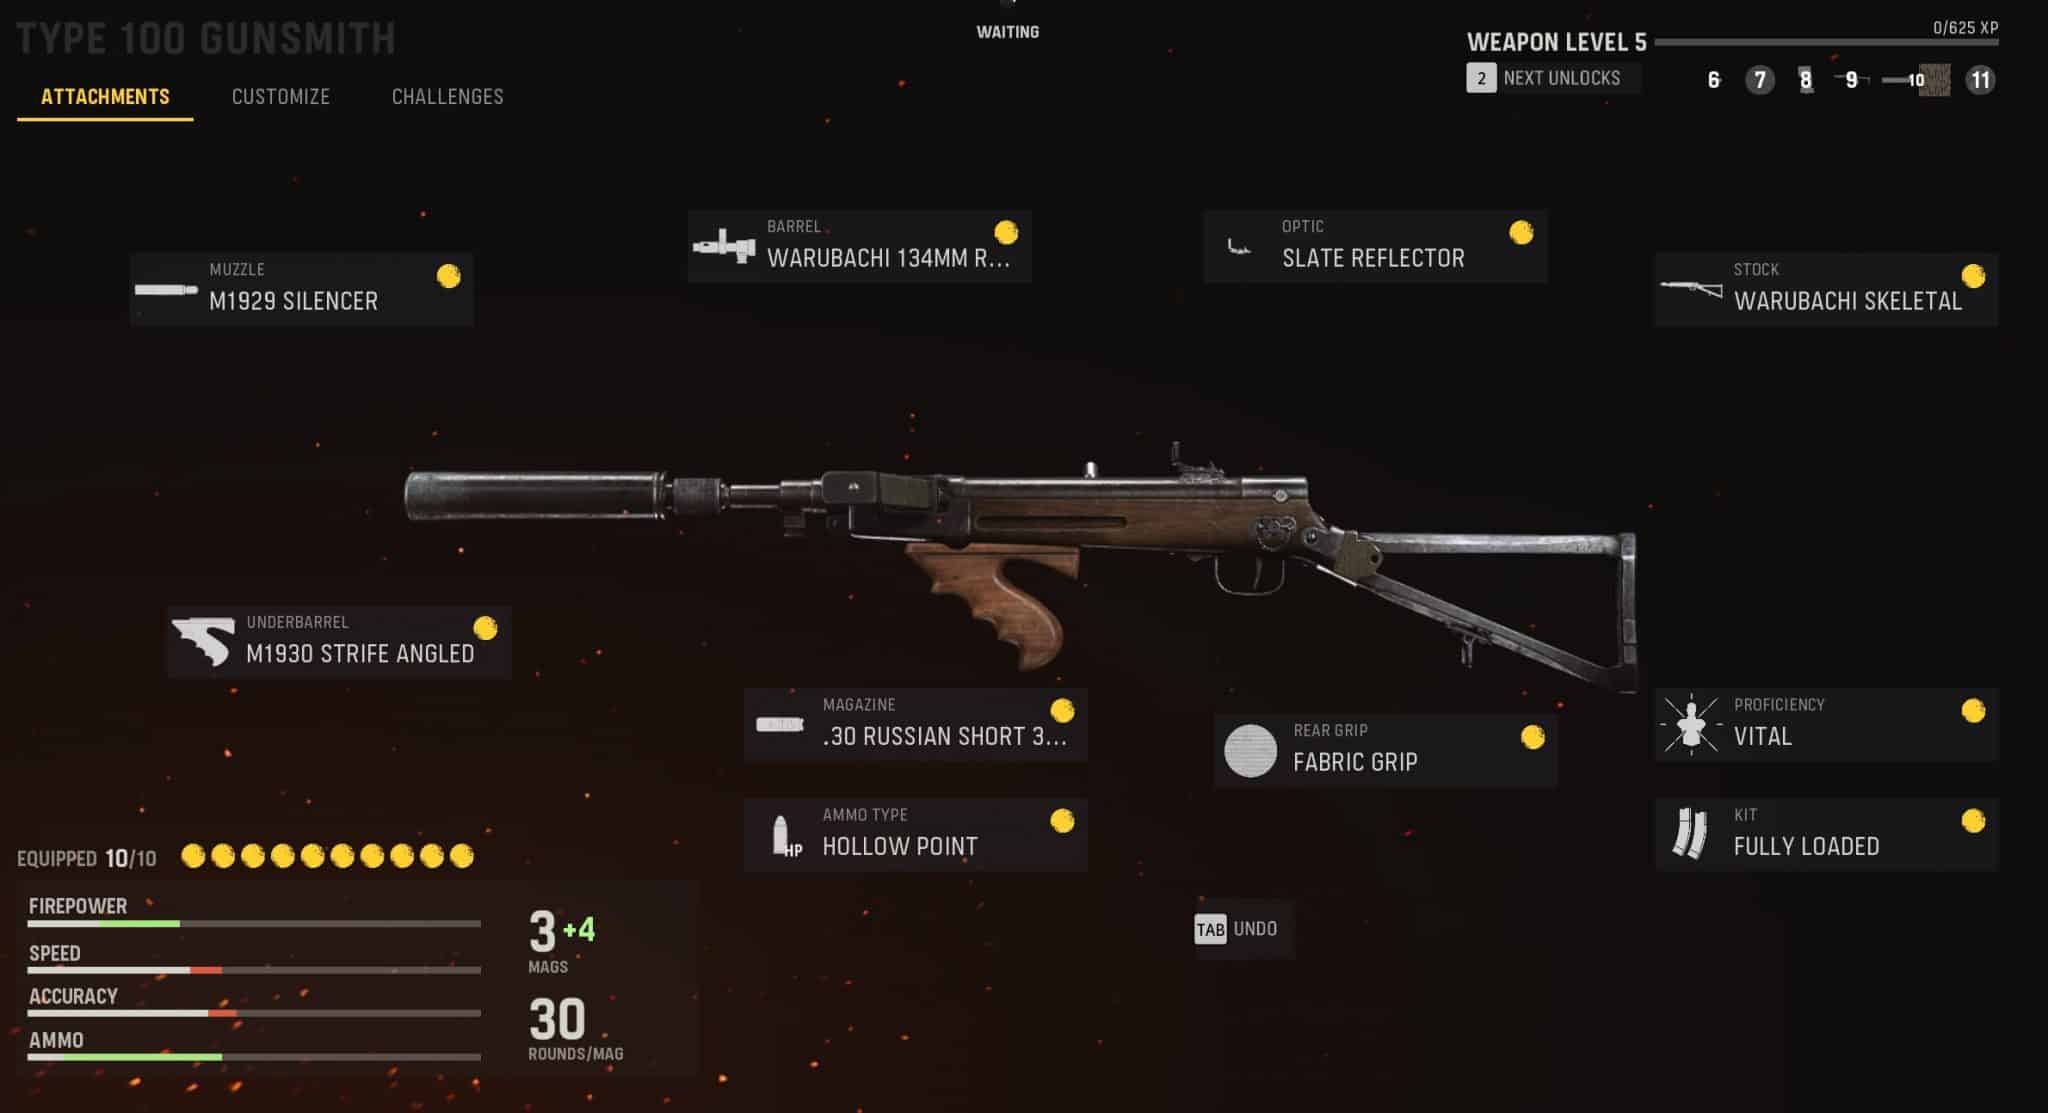 Type 100 in the CoD Vanguard loadout screen